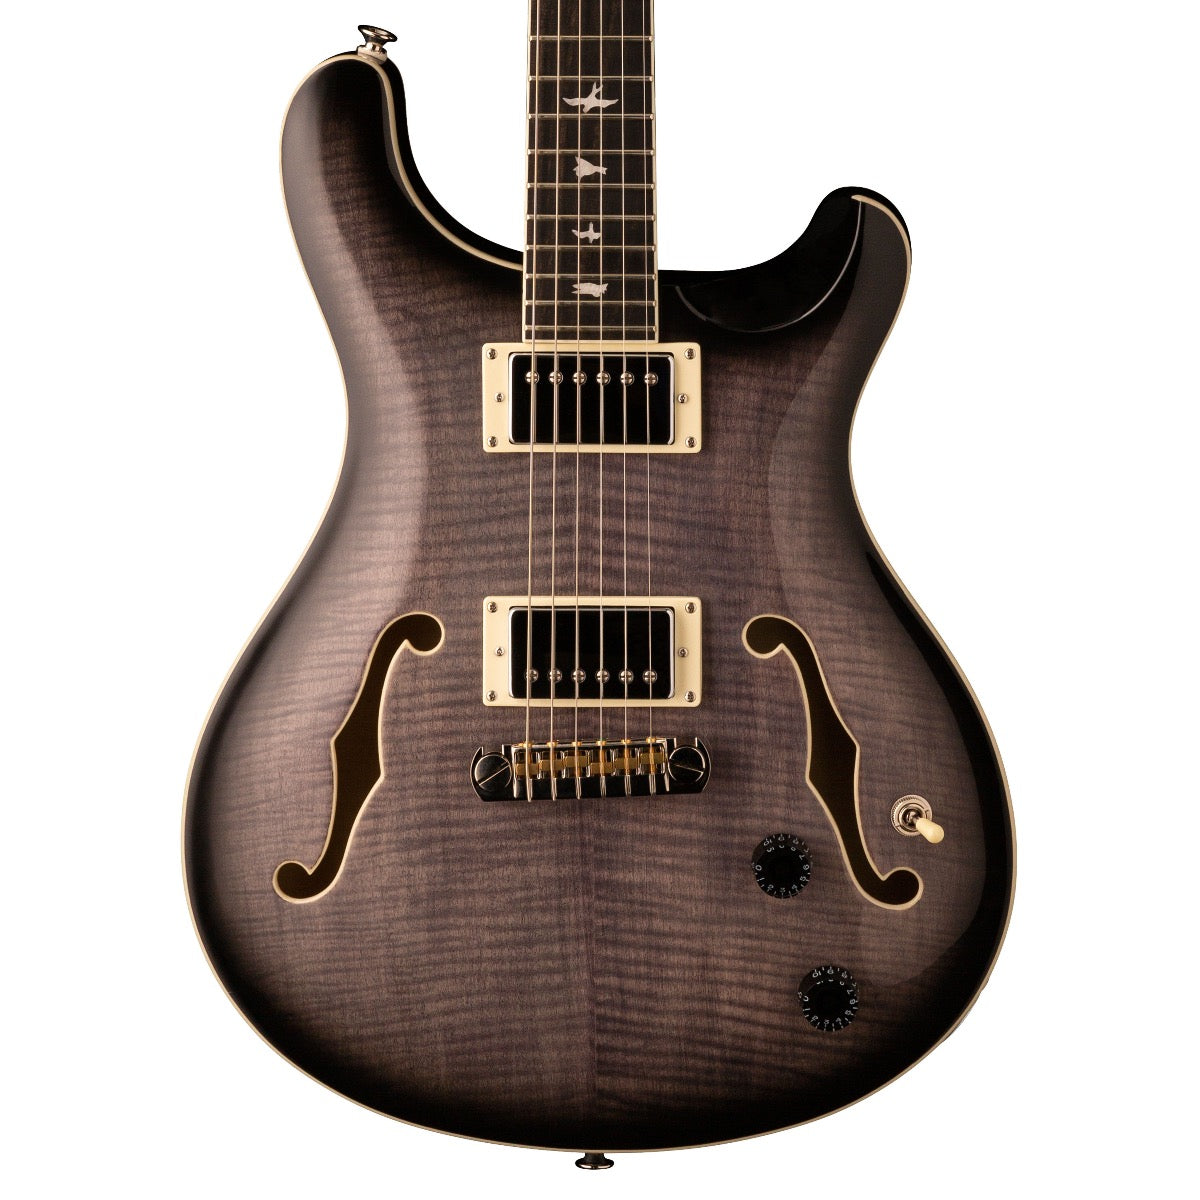 Close-up top view of PRS SE Hollowbody II Electric Guitar - Charcoal Burst  showing body and portion of fingerboard